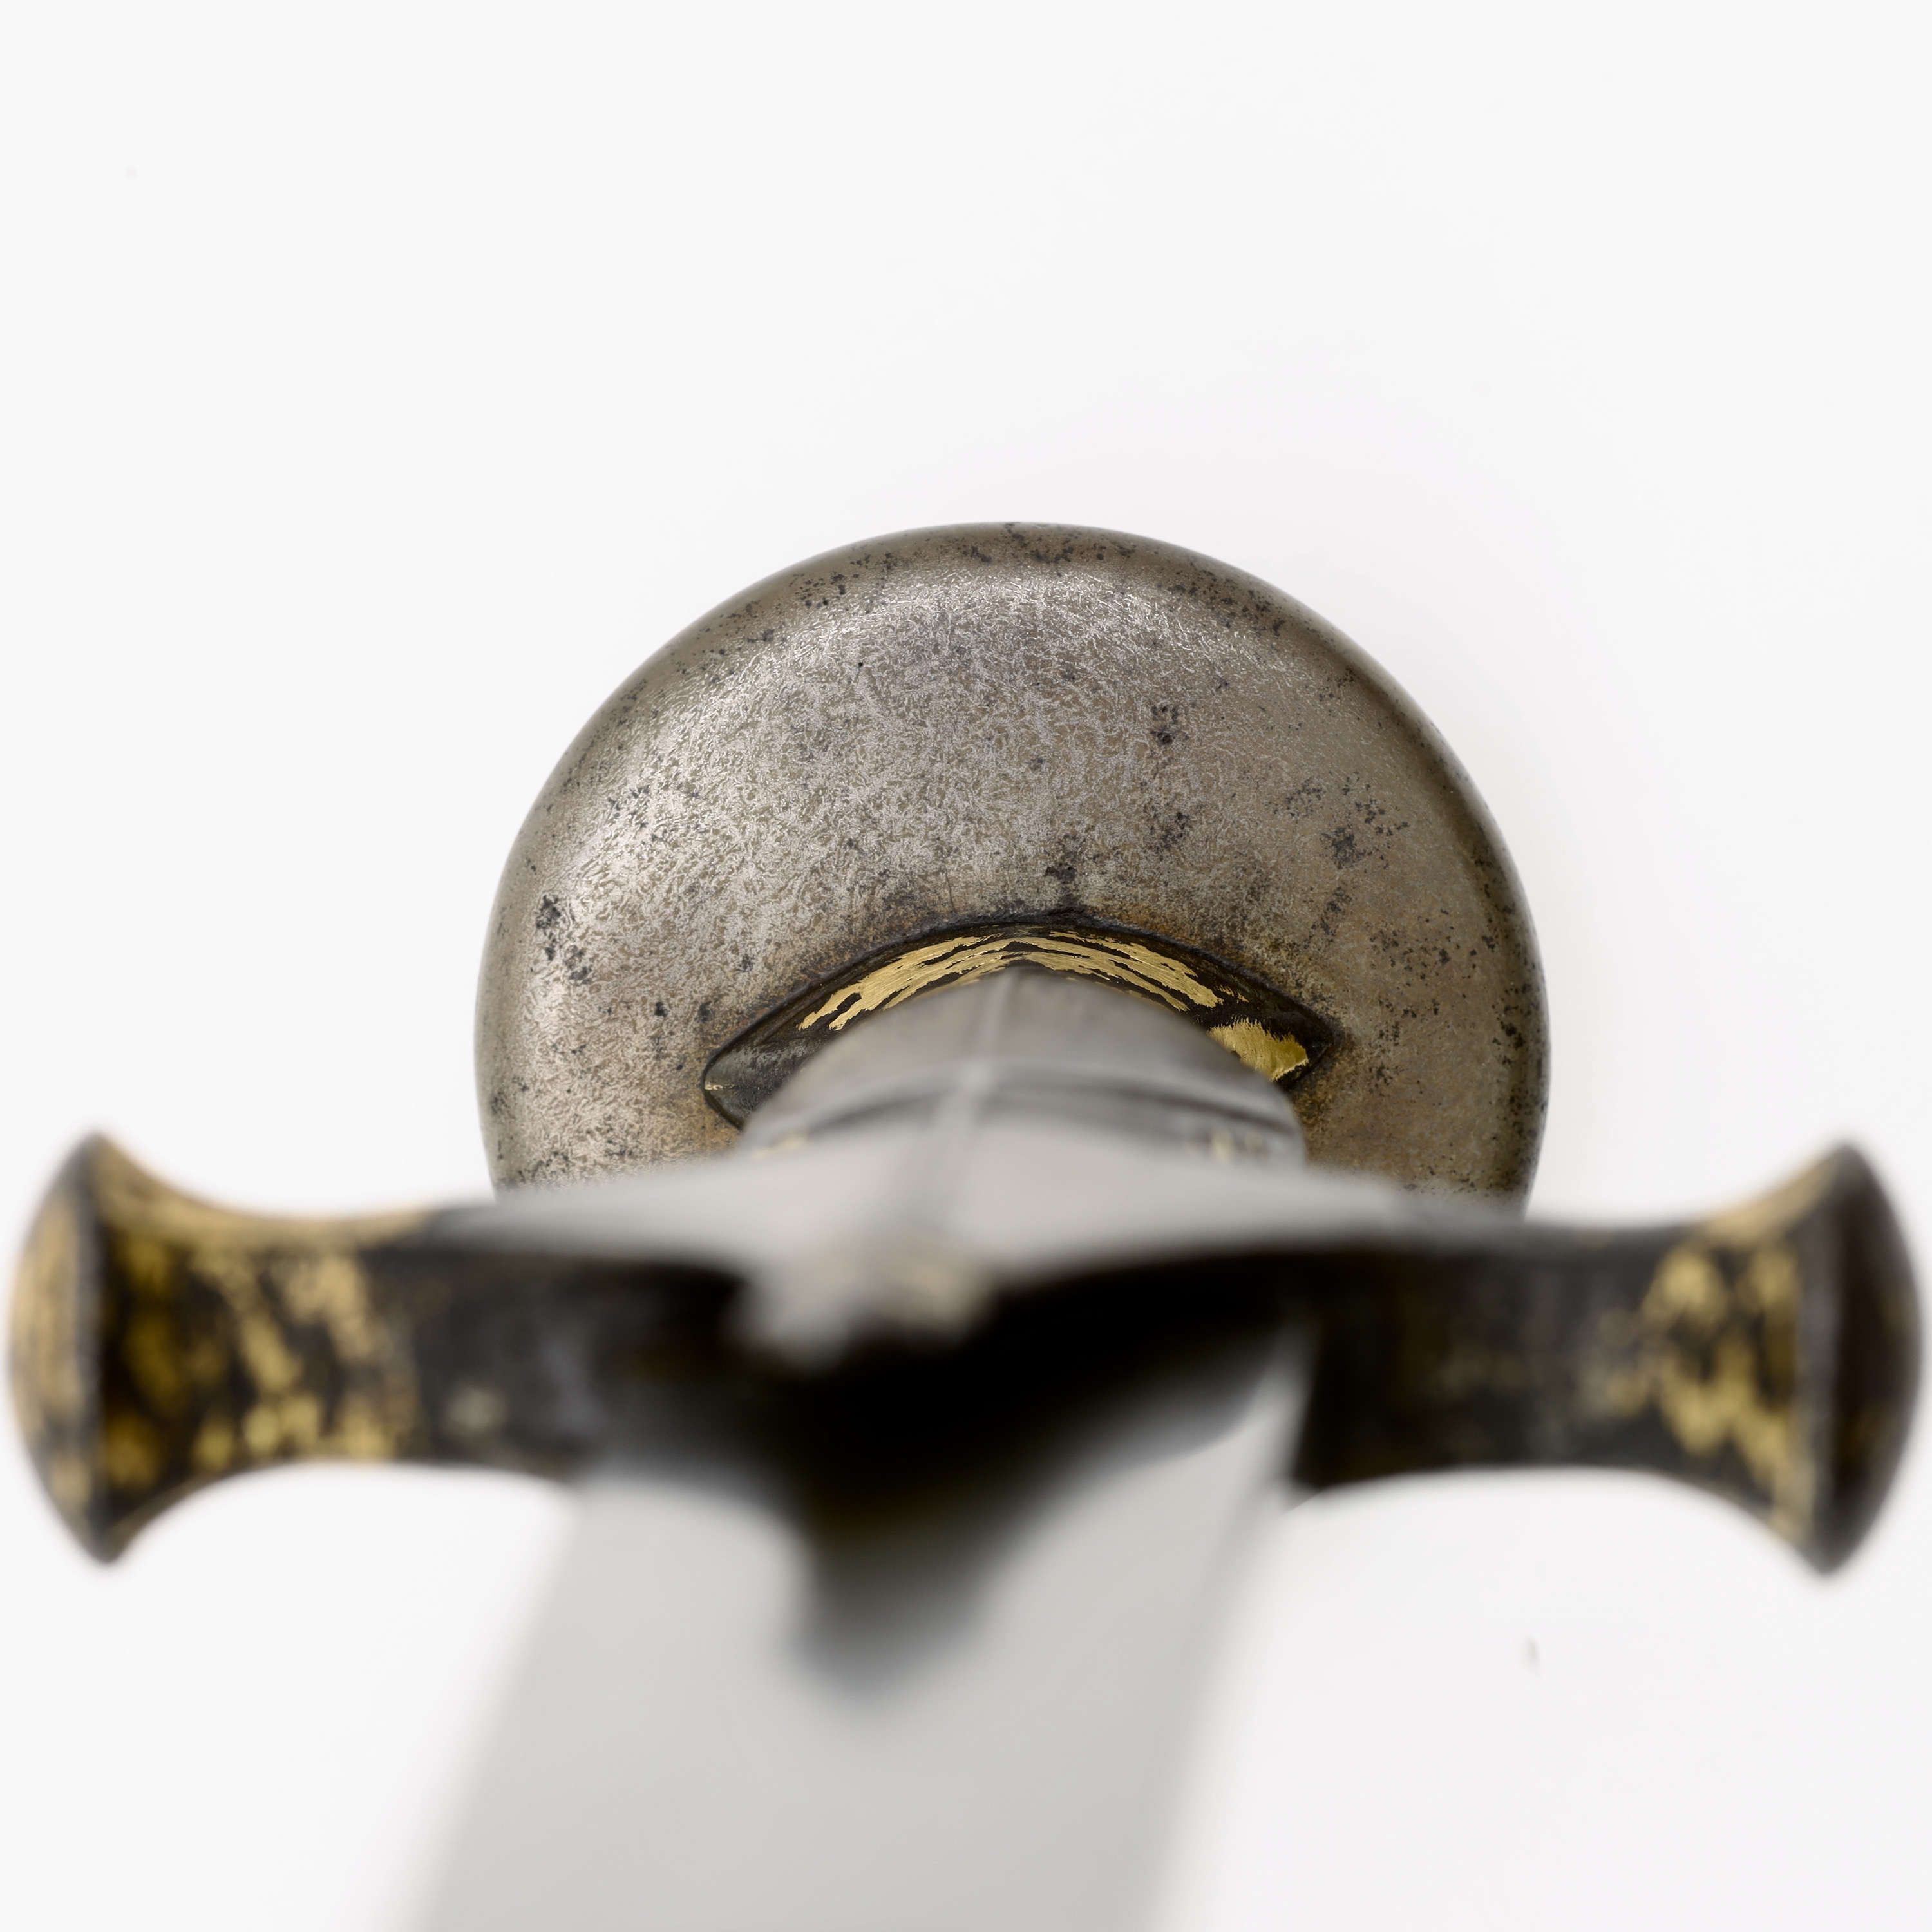 Talwar with wootz hilt and blade and tiger stripe decoration